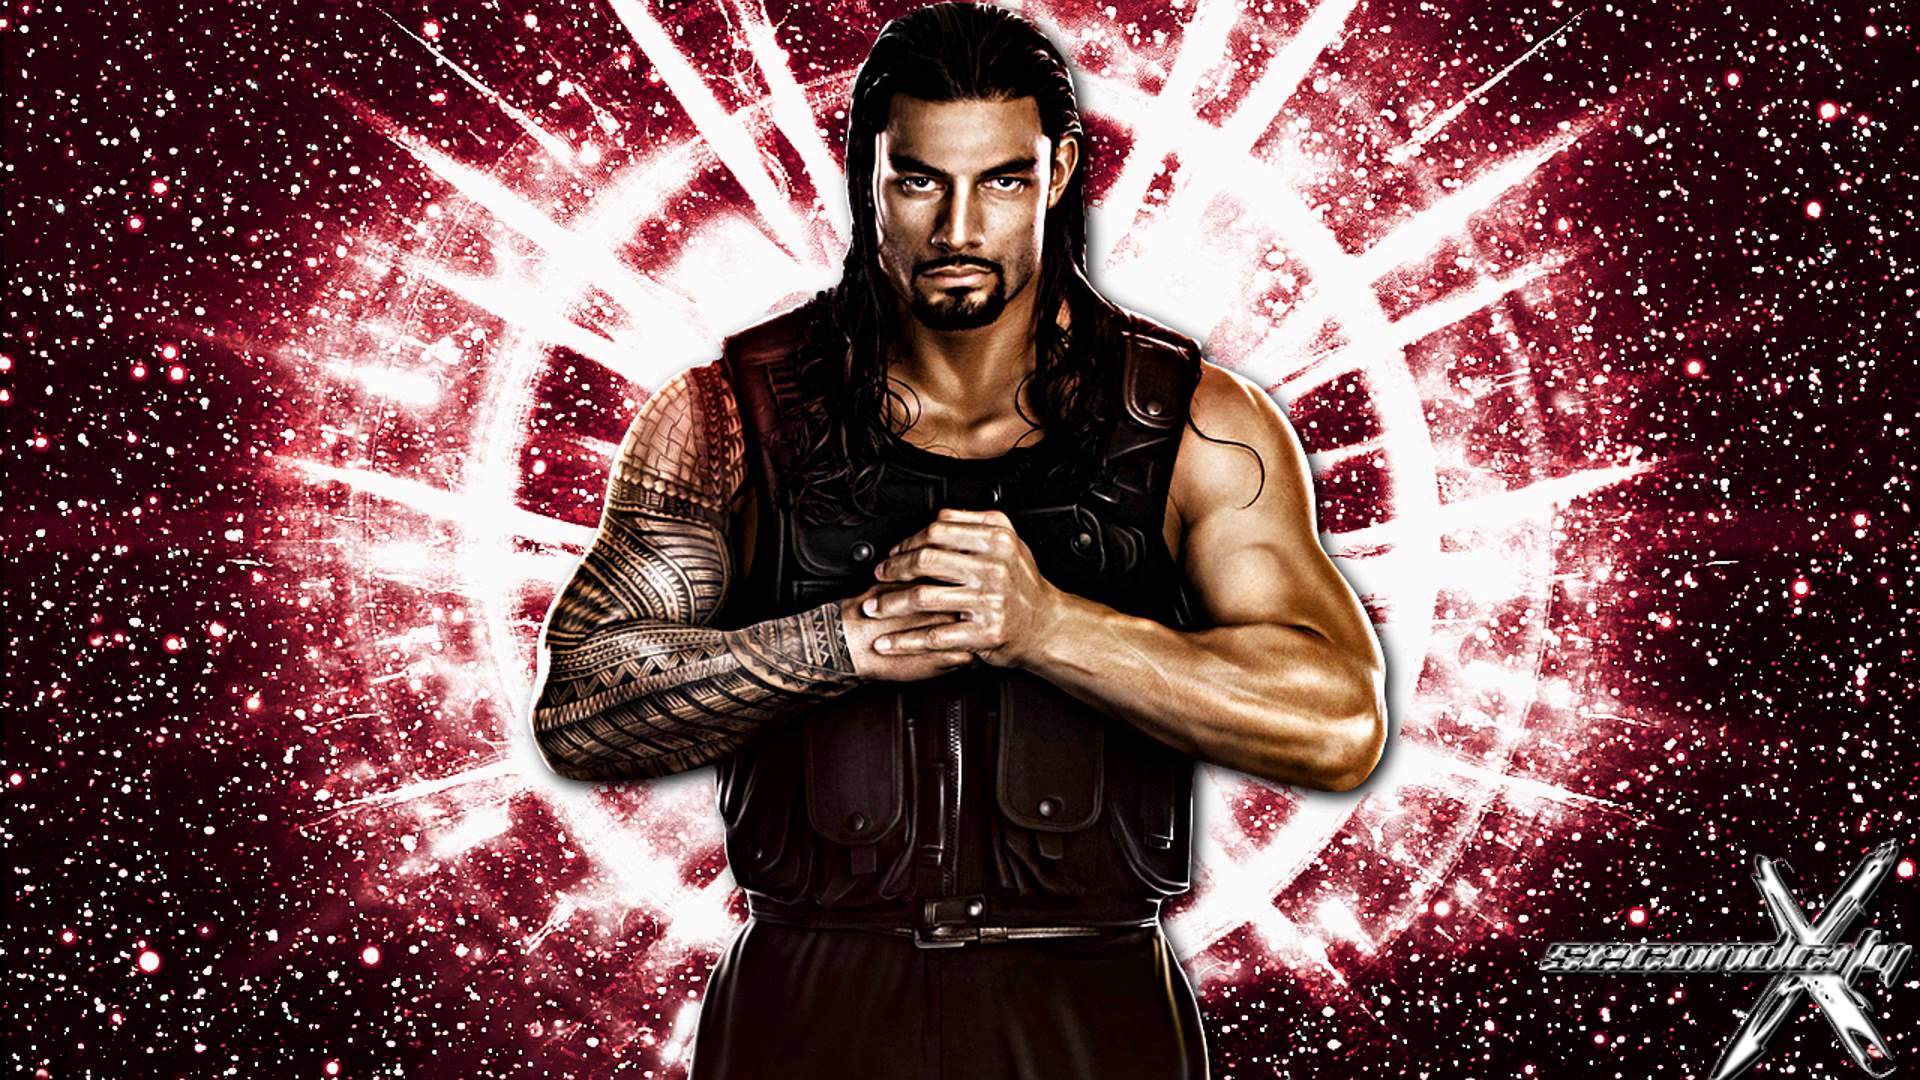 Wwe Quot Special Op Roman Reigns 2nd Theme Song